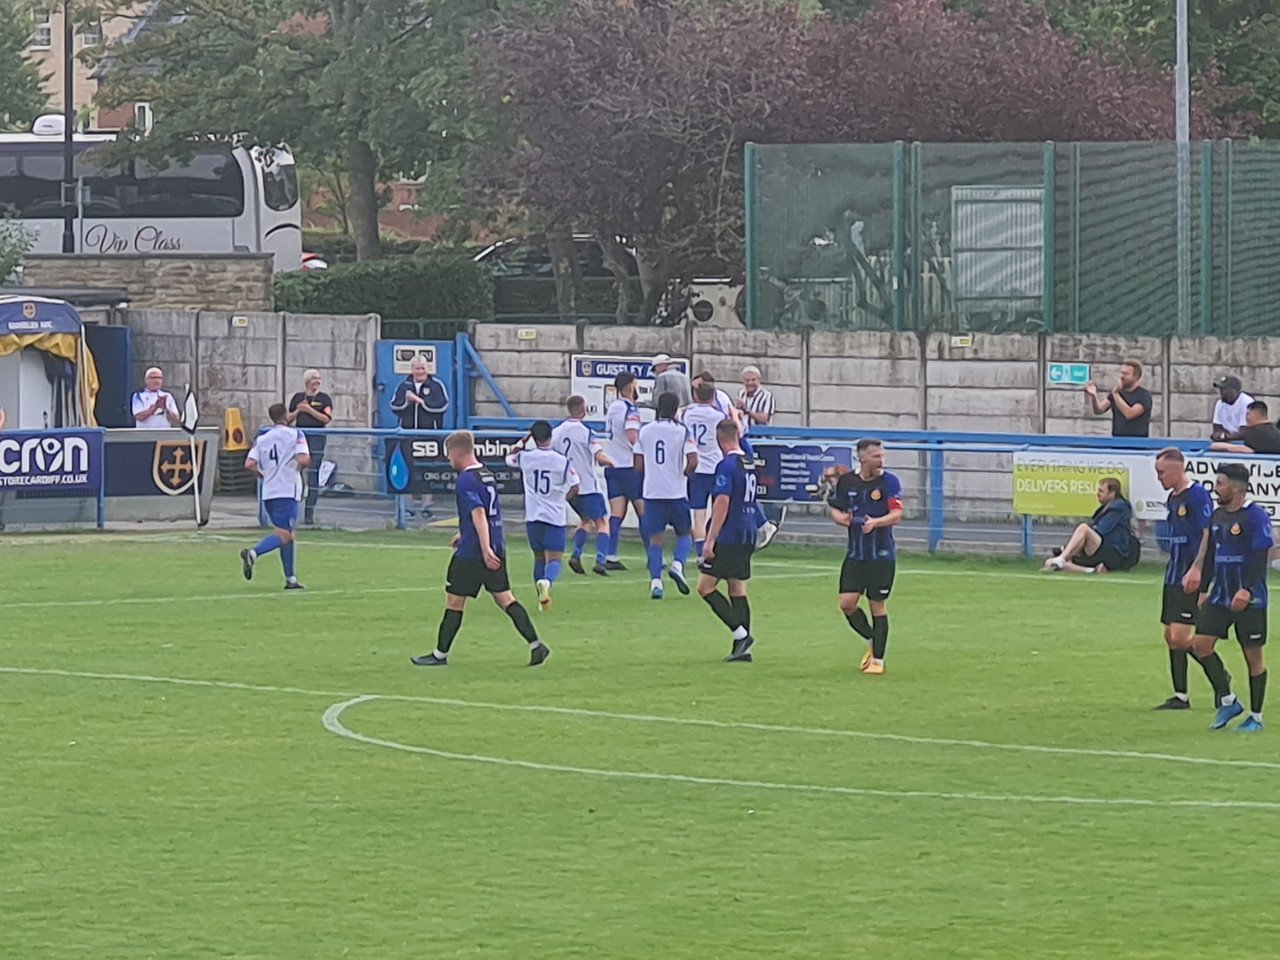 Guiseley AFC 2-1 Avro FC: Lions recover to prevent FA Cup upset